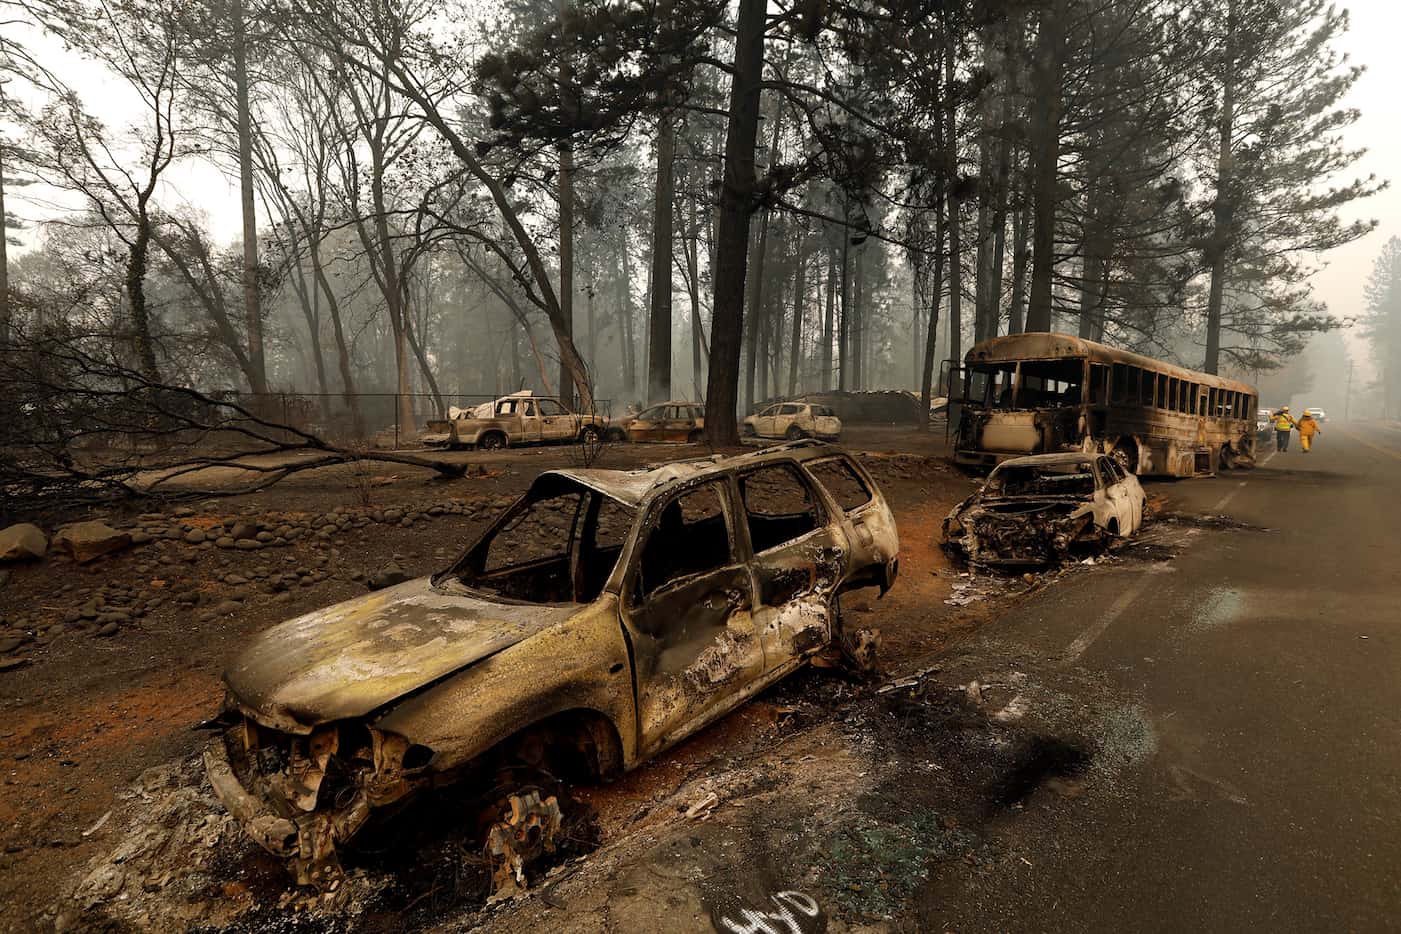 The town of Paradise, Calif., is mostly a ghostown after the explosive Camp Fire burned...